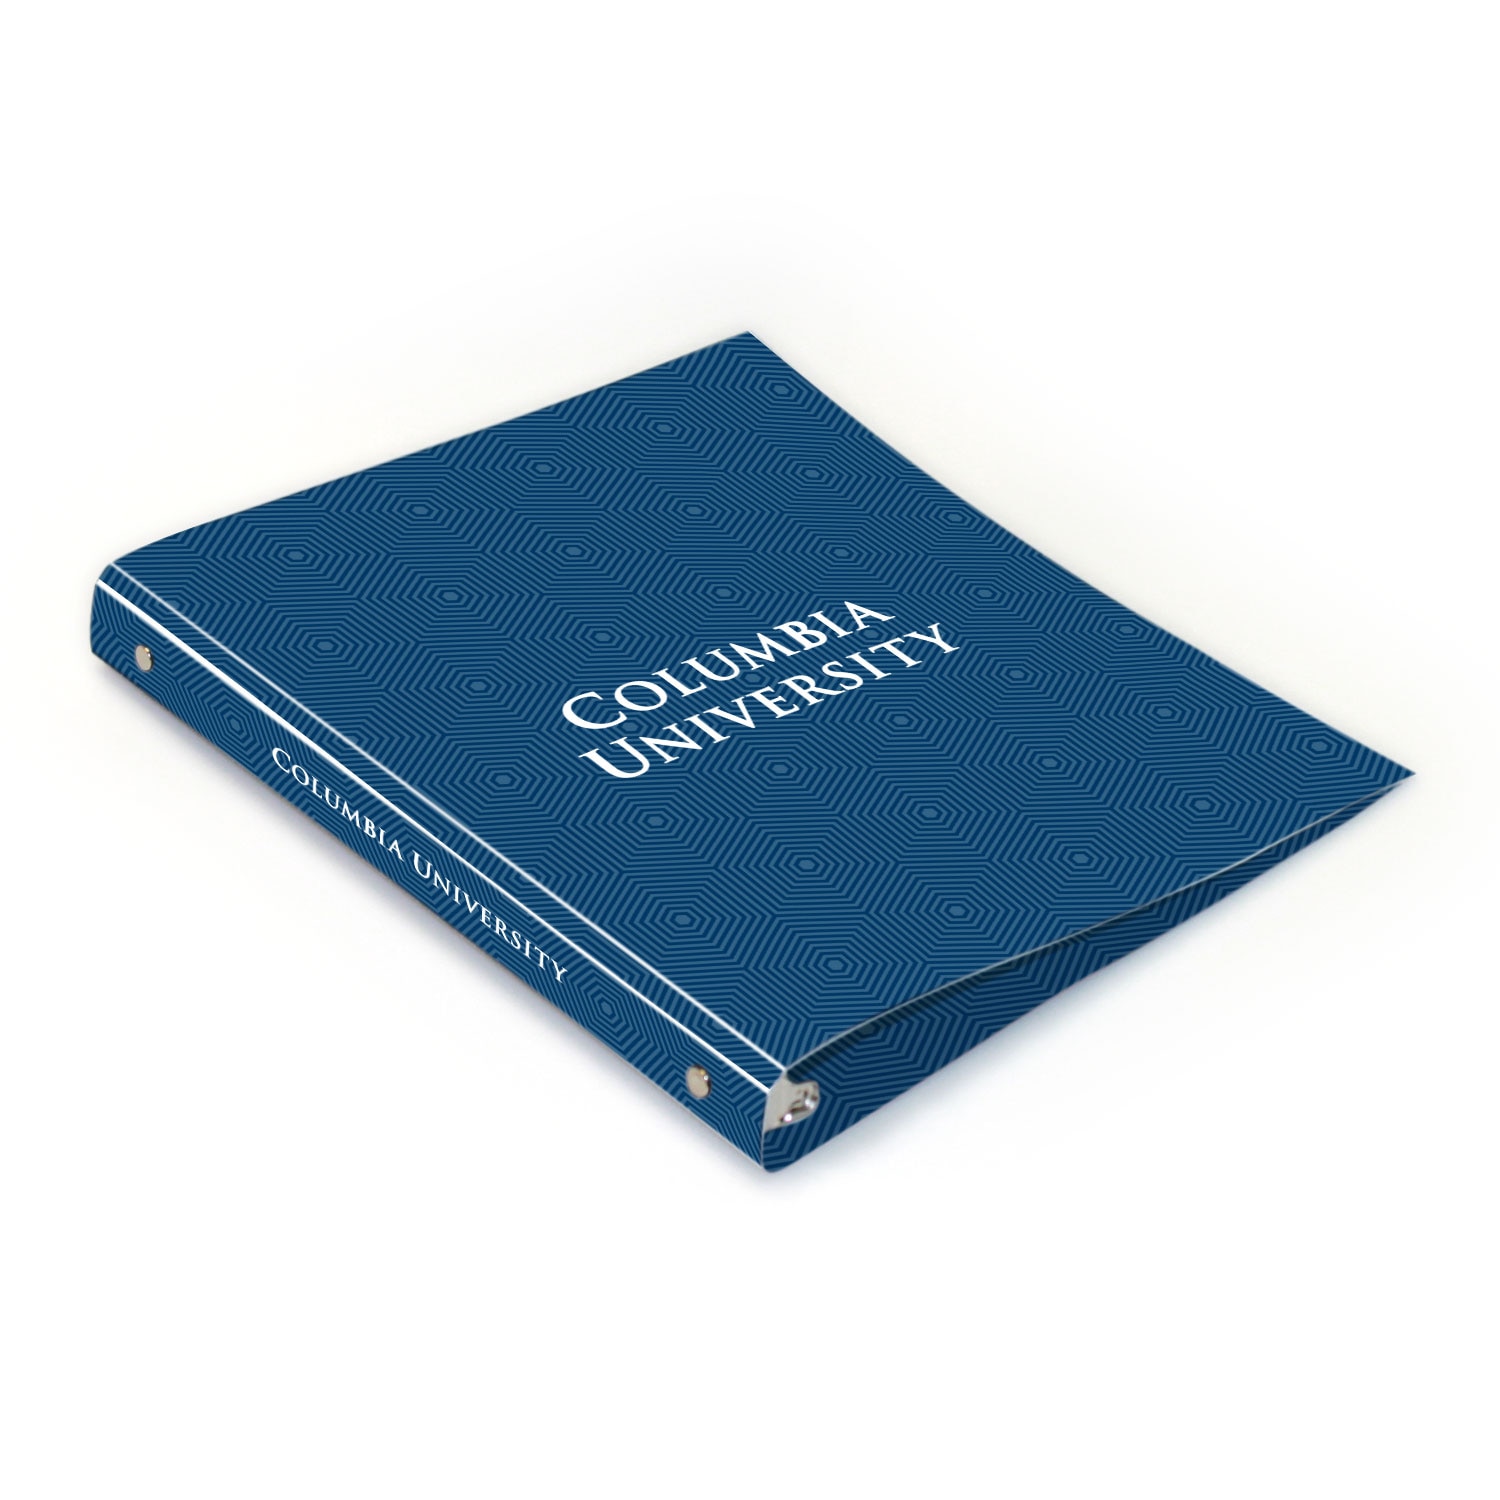 Central Connecticut Full Color 2 sided Imprinted Flexible 1" Logo 1 Binder 10.5" x 11.5"